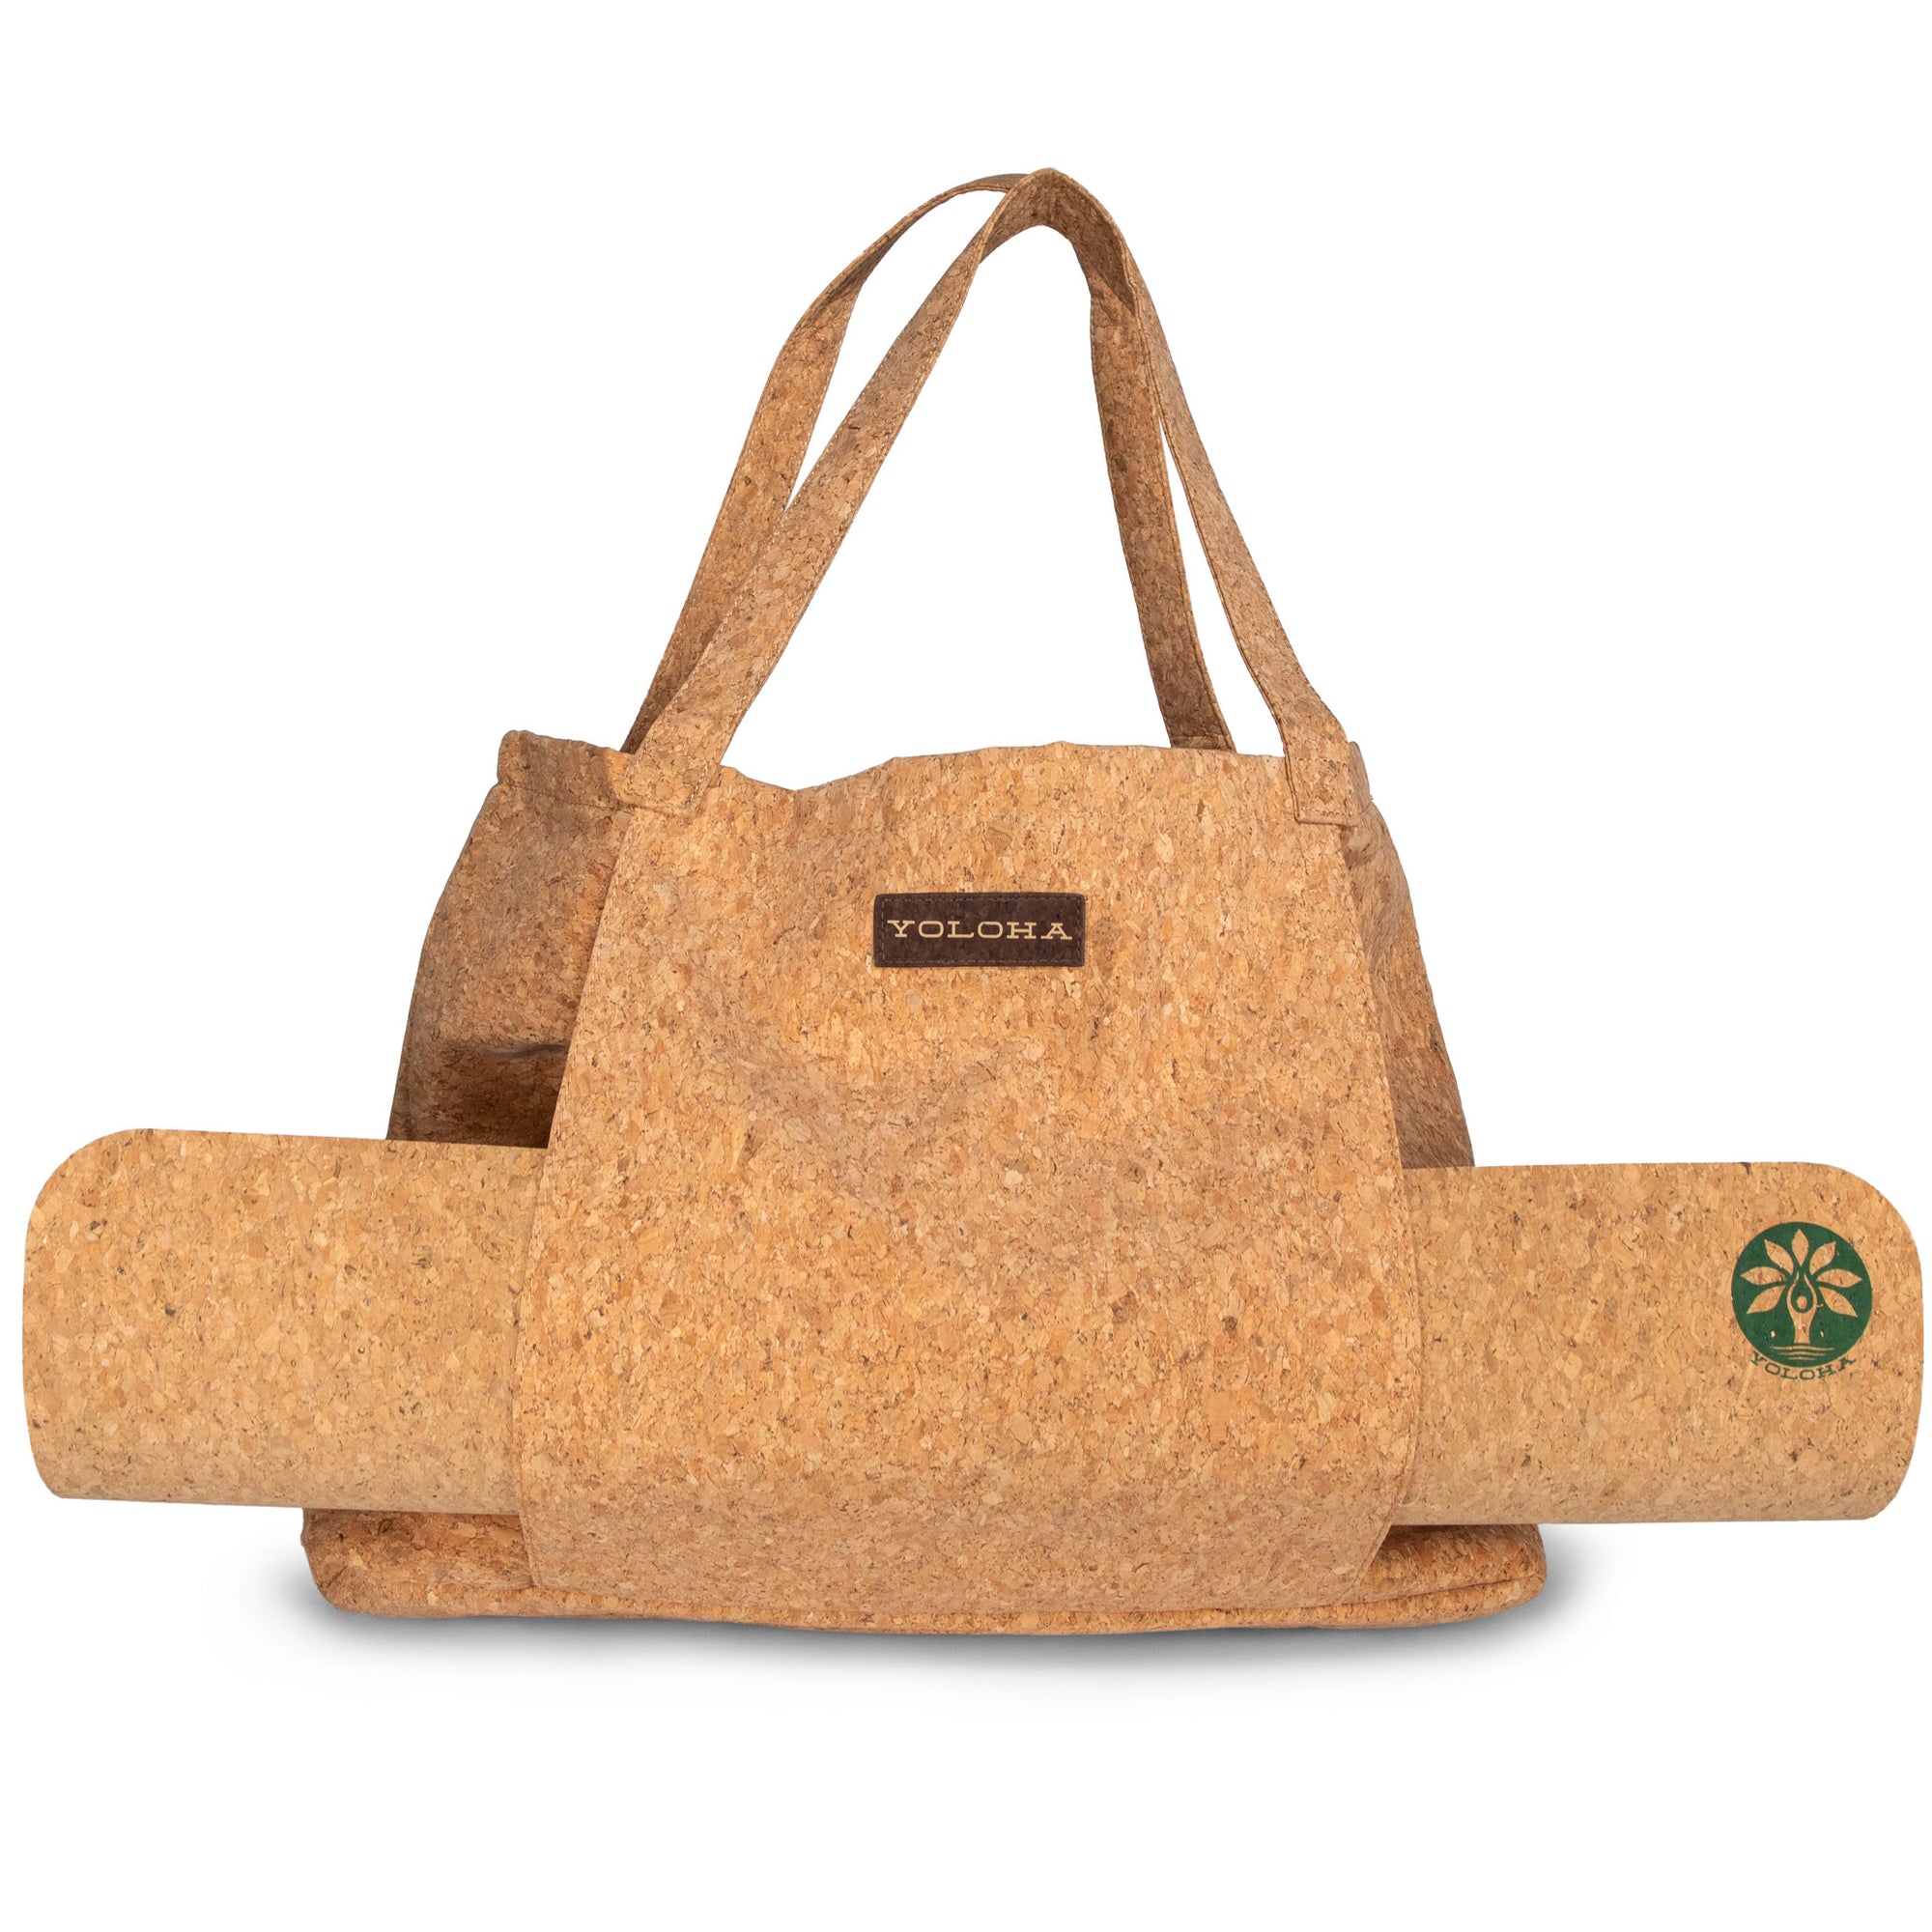 The Best Eco-Friendly Cork Yoga Mats and Yoga Accessories